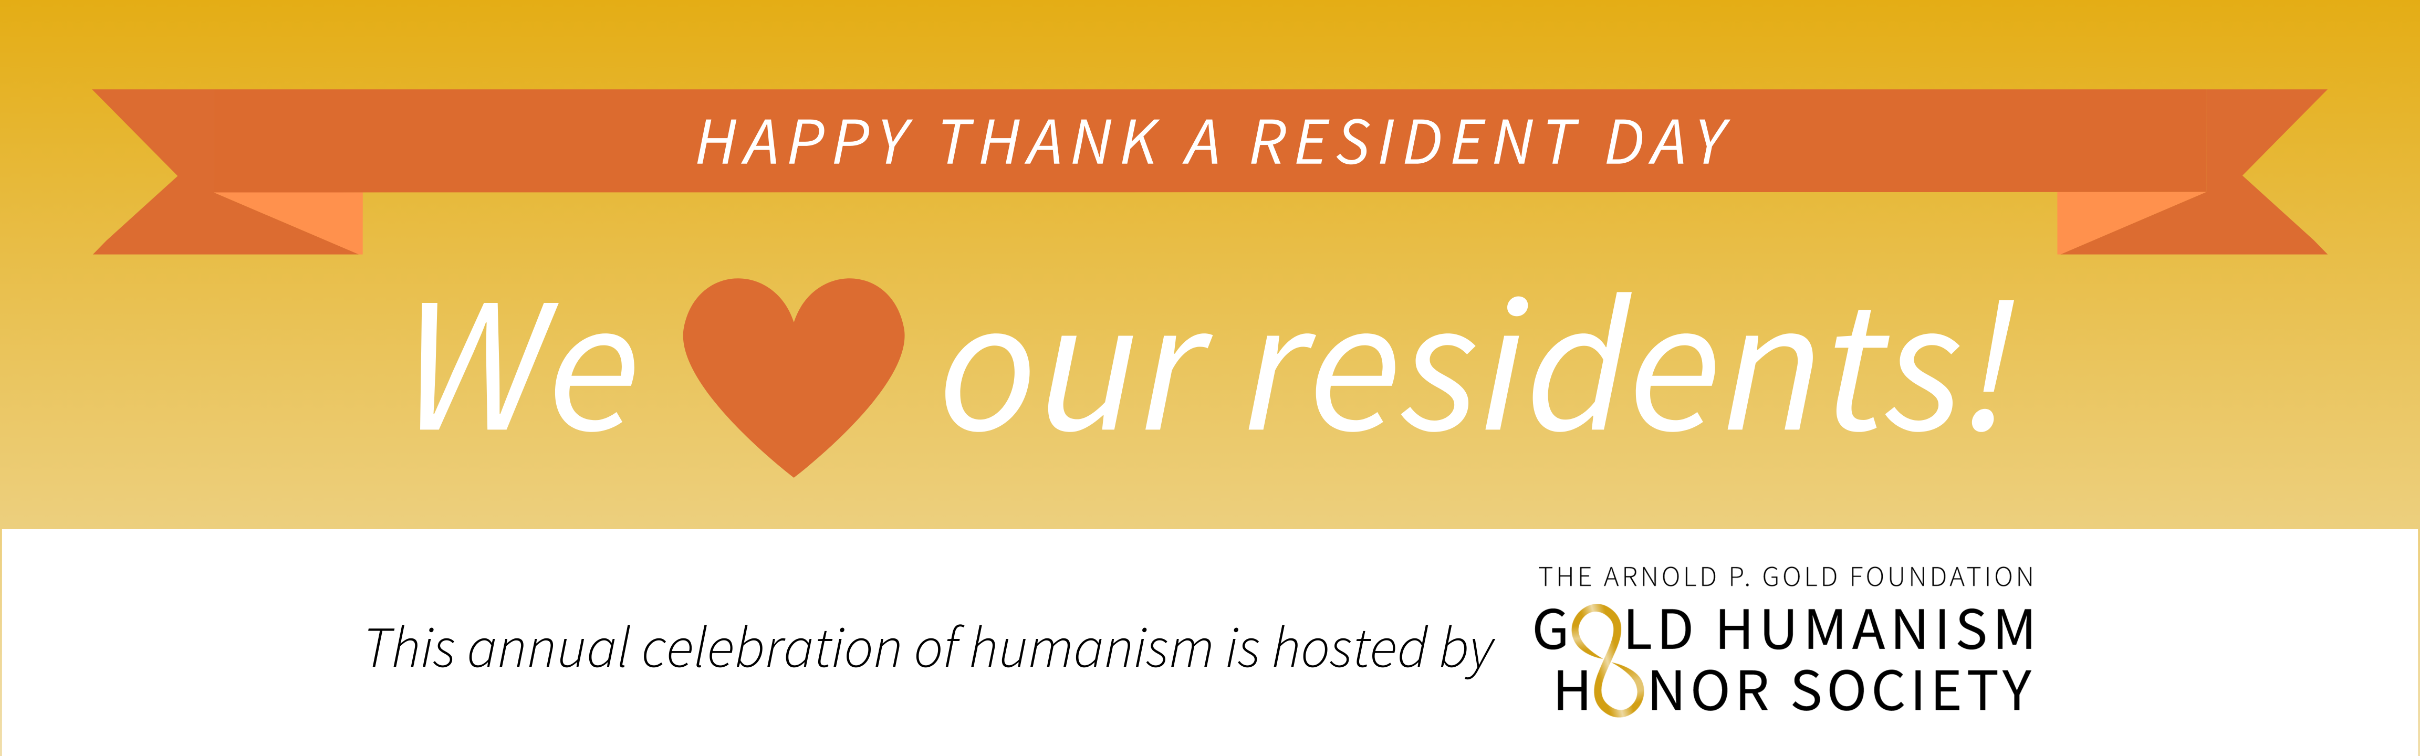 Happy Thank A Resident Day. We love our residents! This annual celebration of humanism is hosted by The Arnold P. Gold Foundation, Gold Humanism Honor Society.